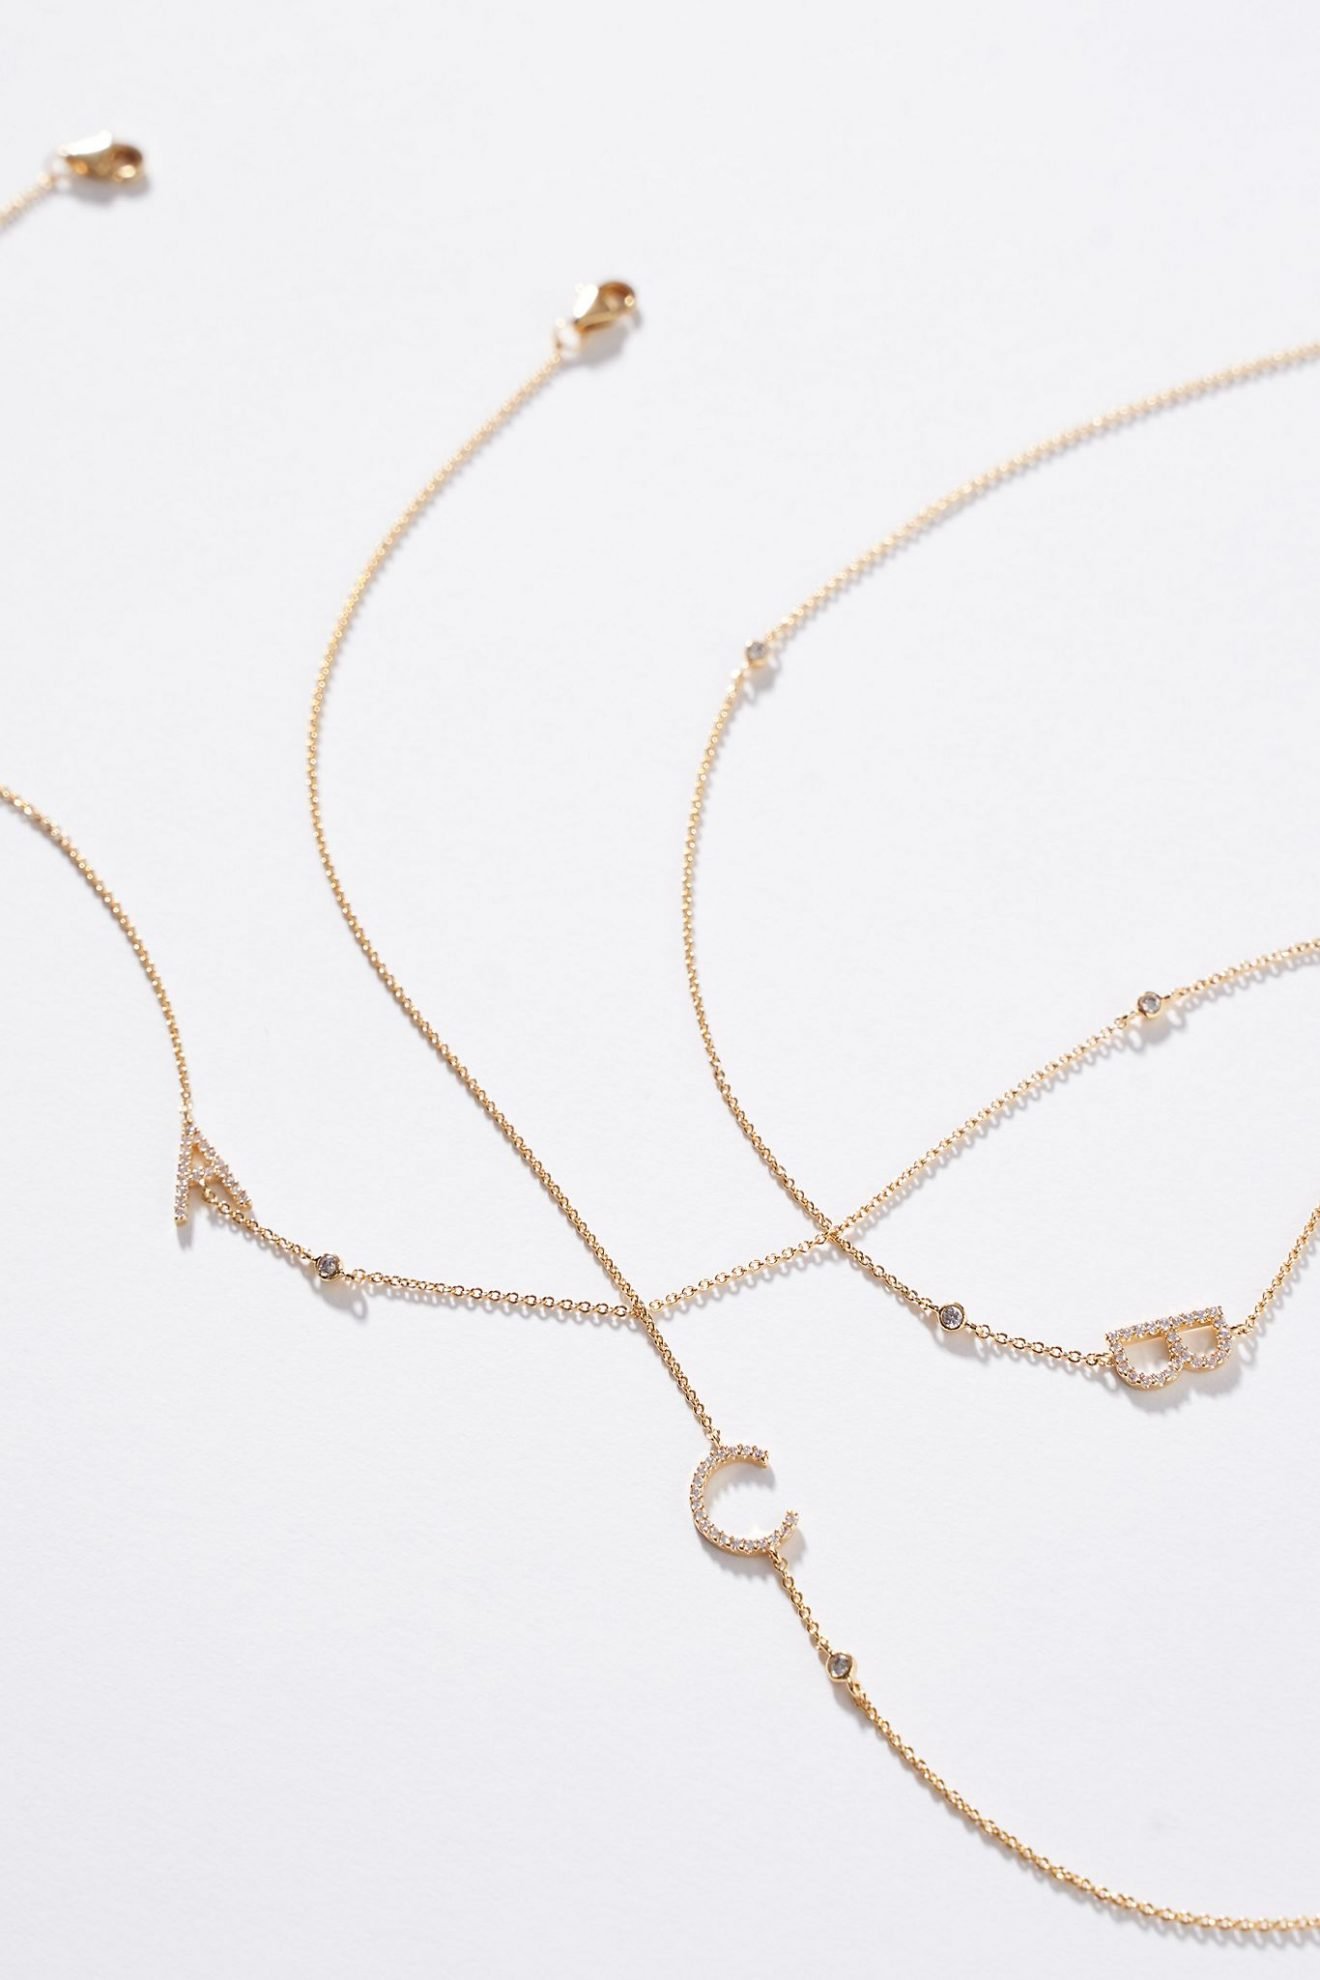 Delicate Monogram Necklace from Anthropologie